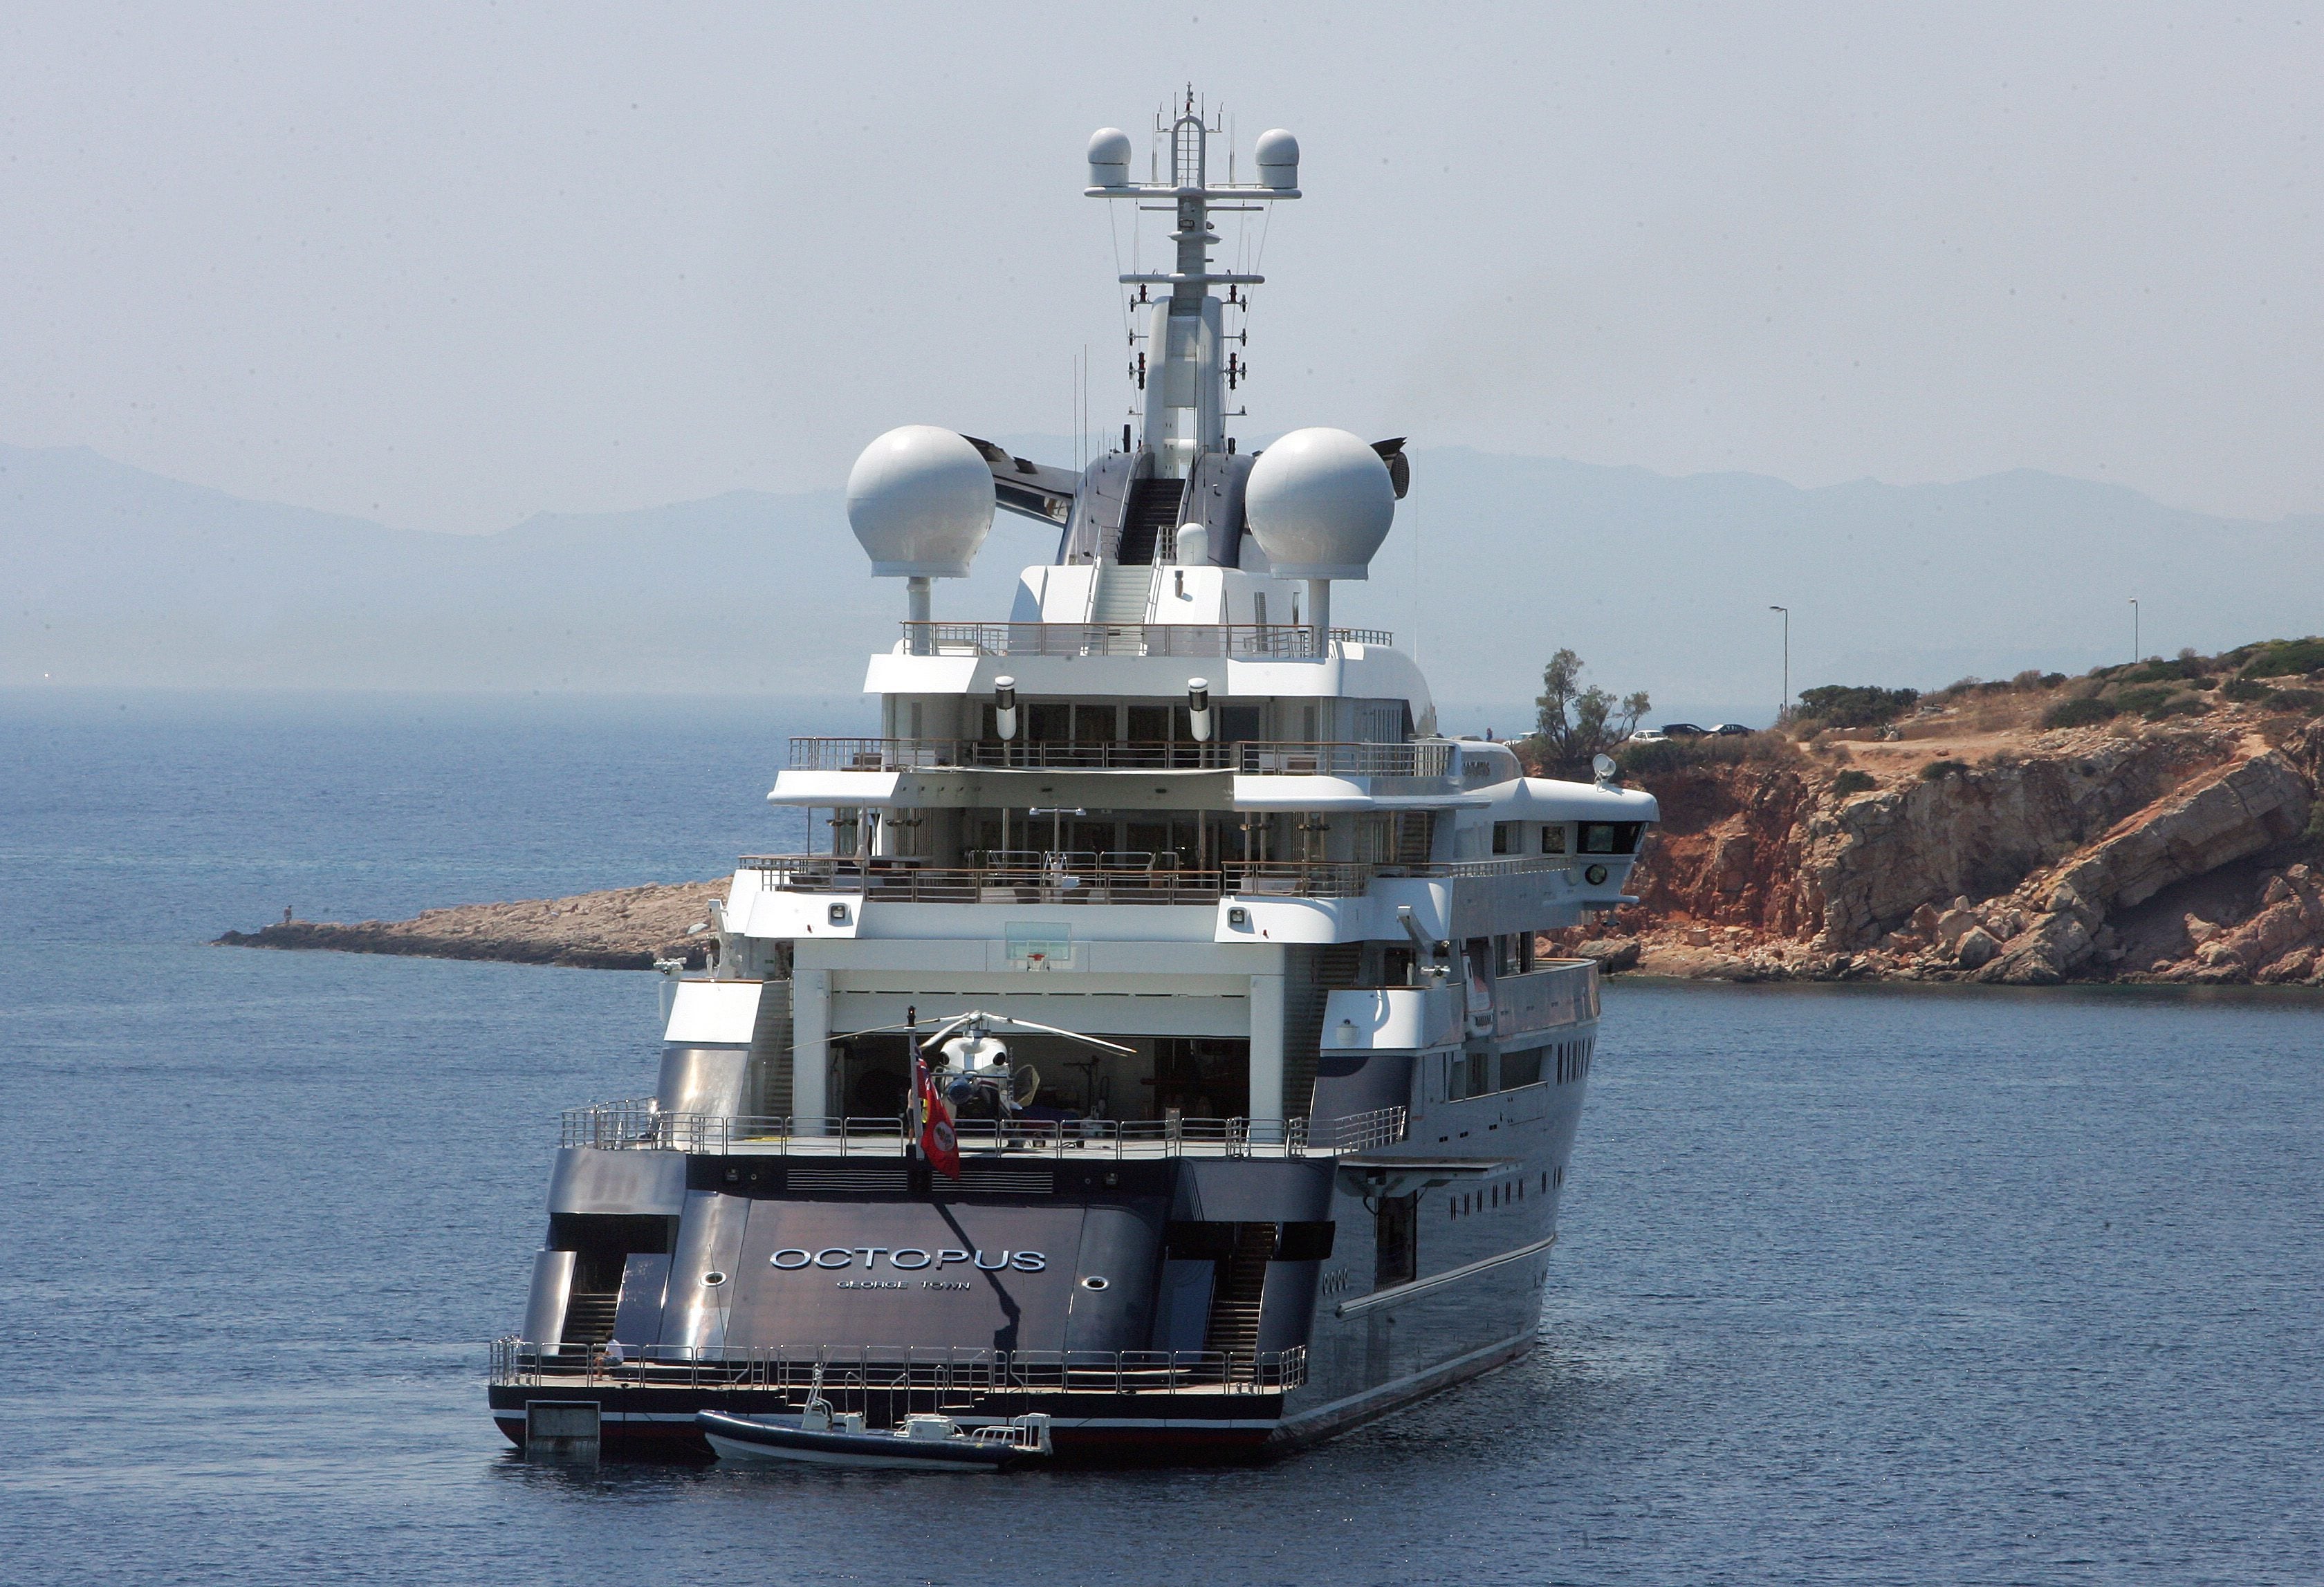 Octopus is seen docked near Athens in 2011